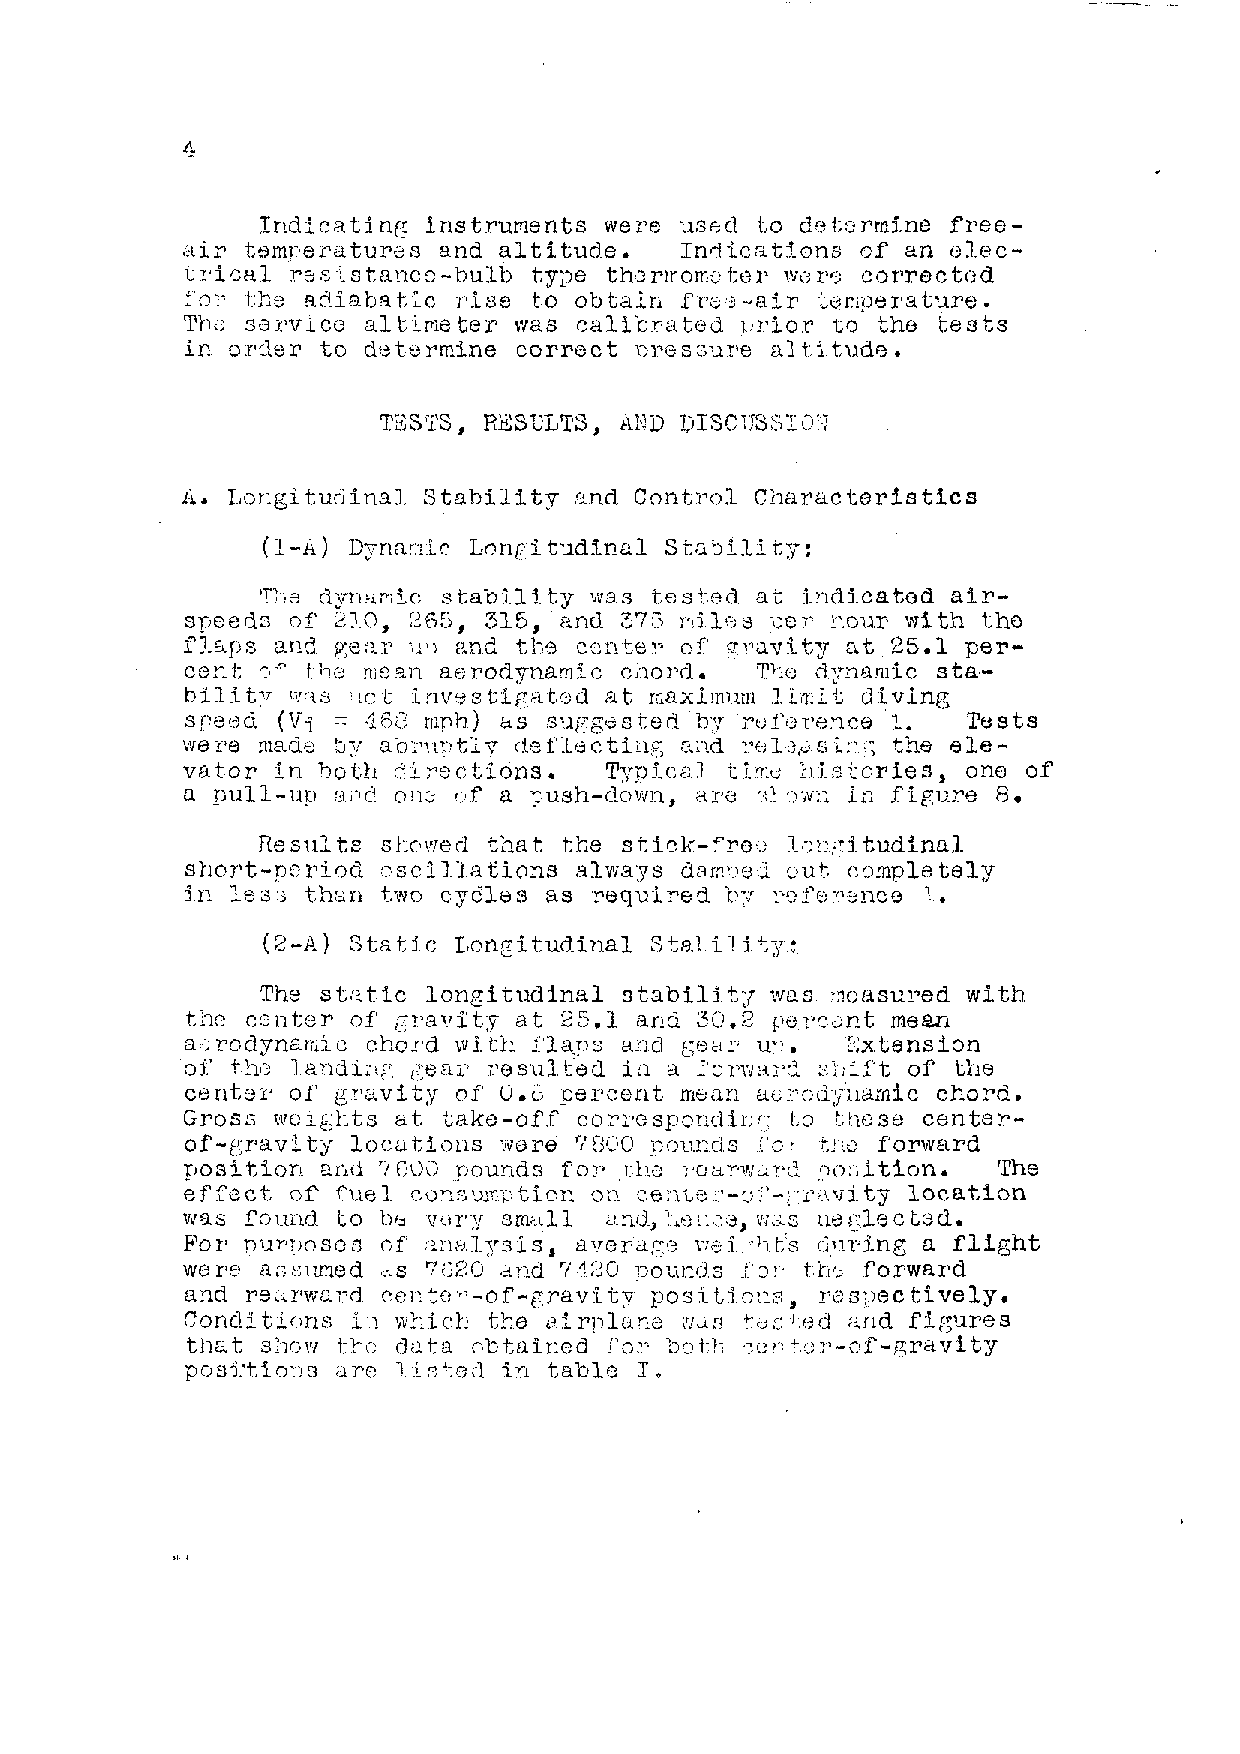 Sample page 4 from AirCorps Library document: Memorandum Report on the Flying Qualities of the Bell P-39D-1